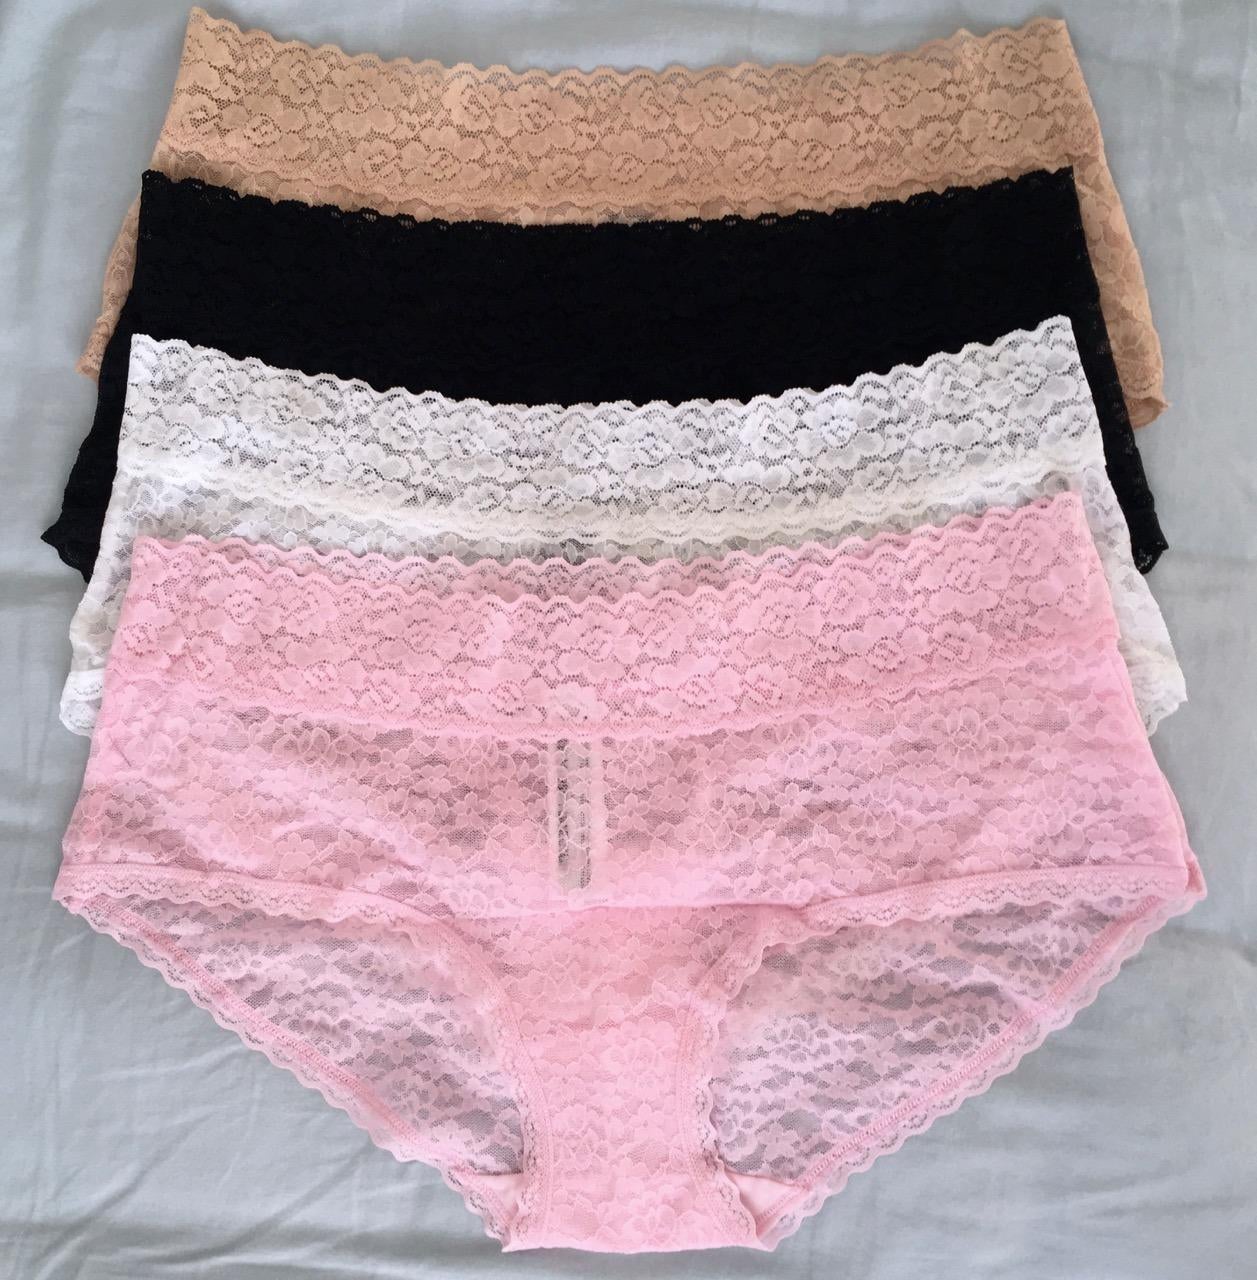 reviewer image of the four pack of lace underwear in pink, white, black, and nude